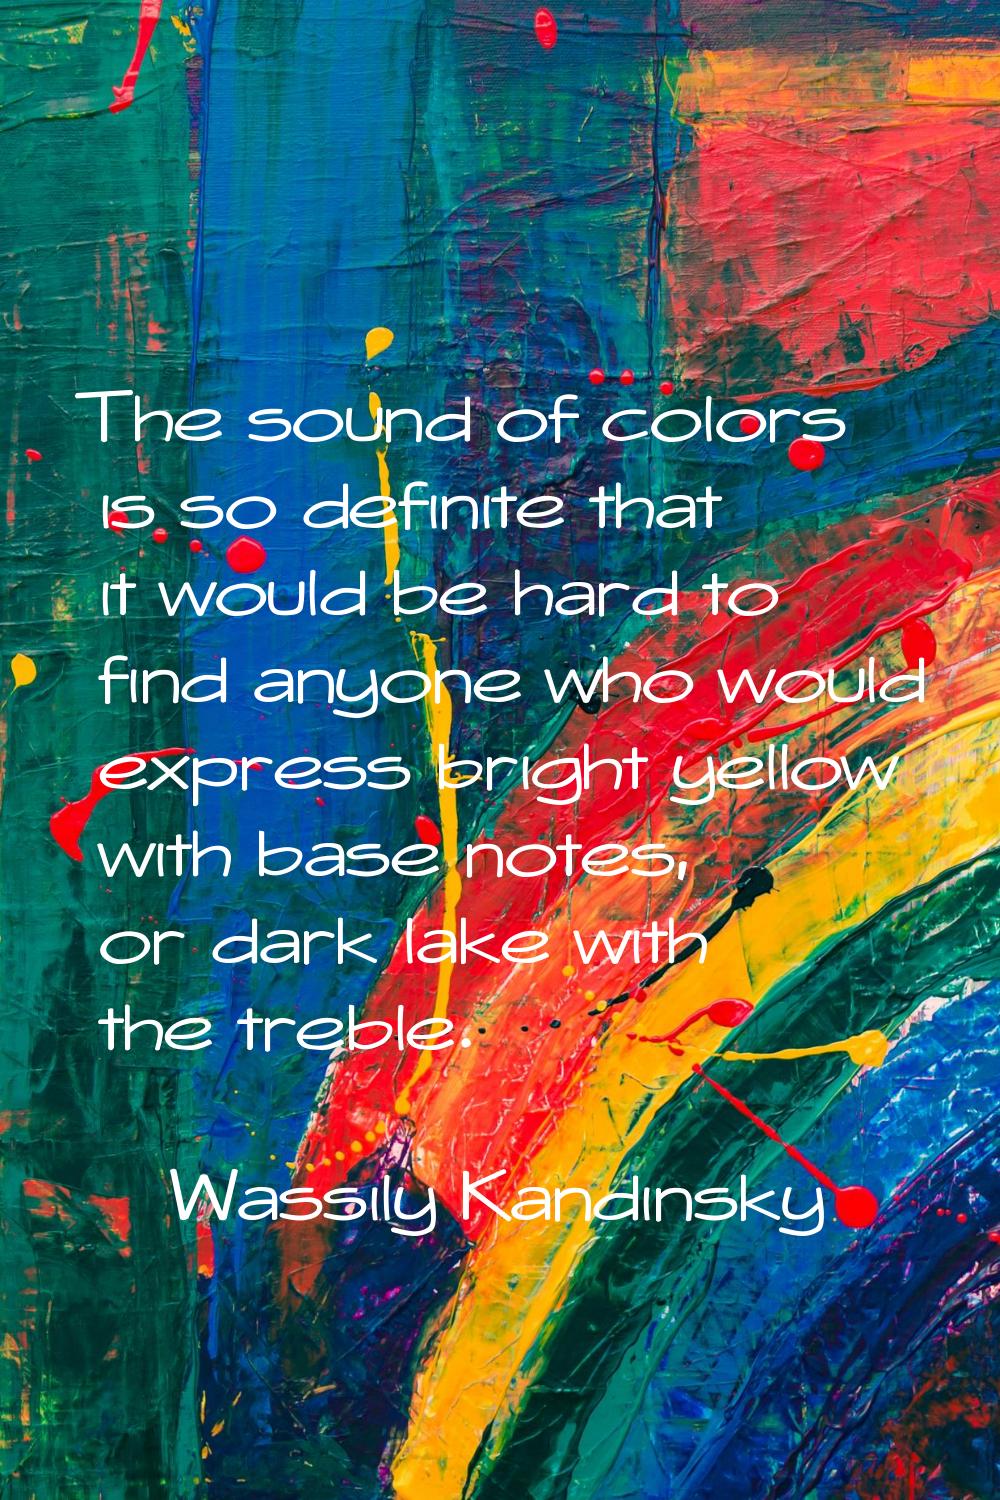 The sound of colors is so definite that it would be hard to find anyone who would express bright ye